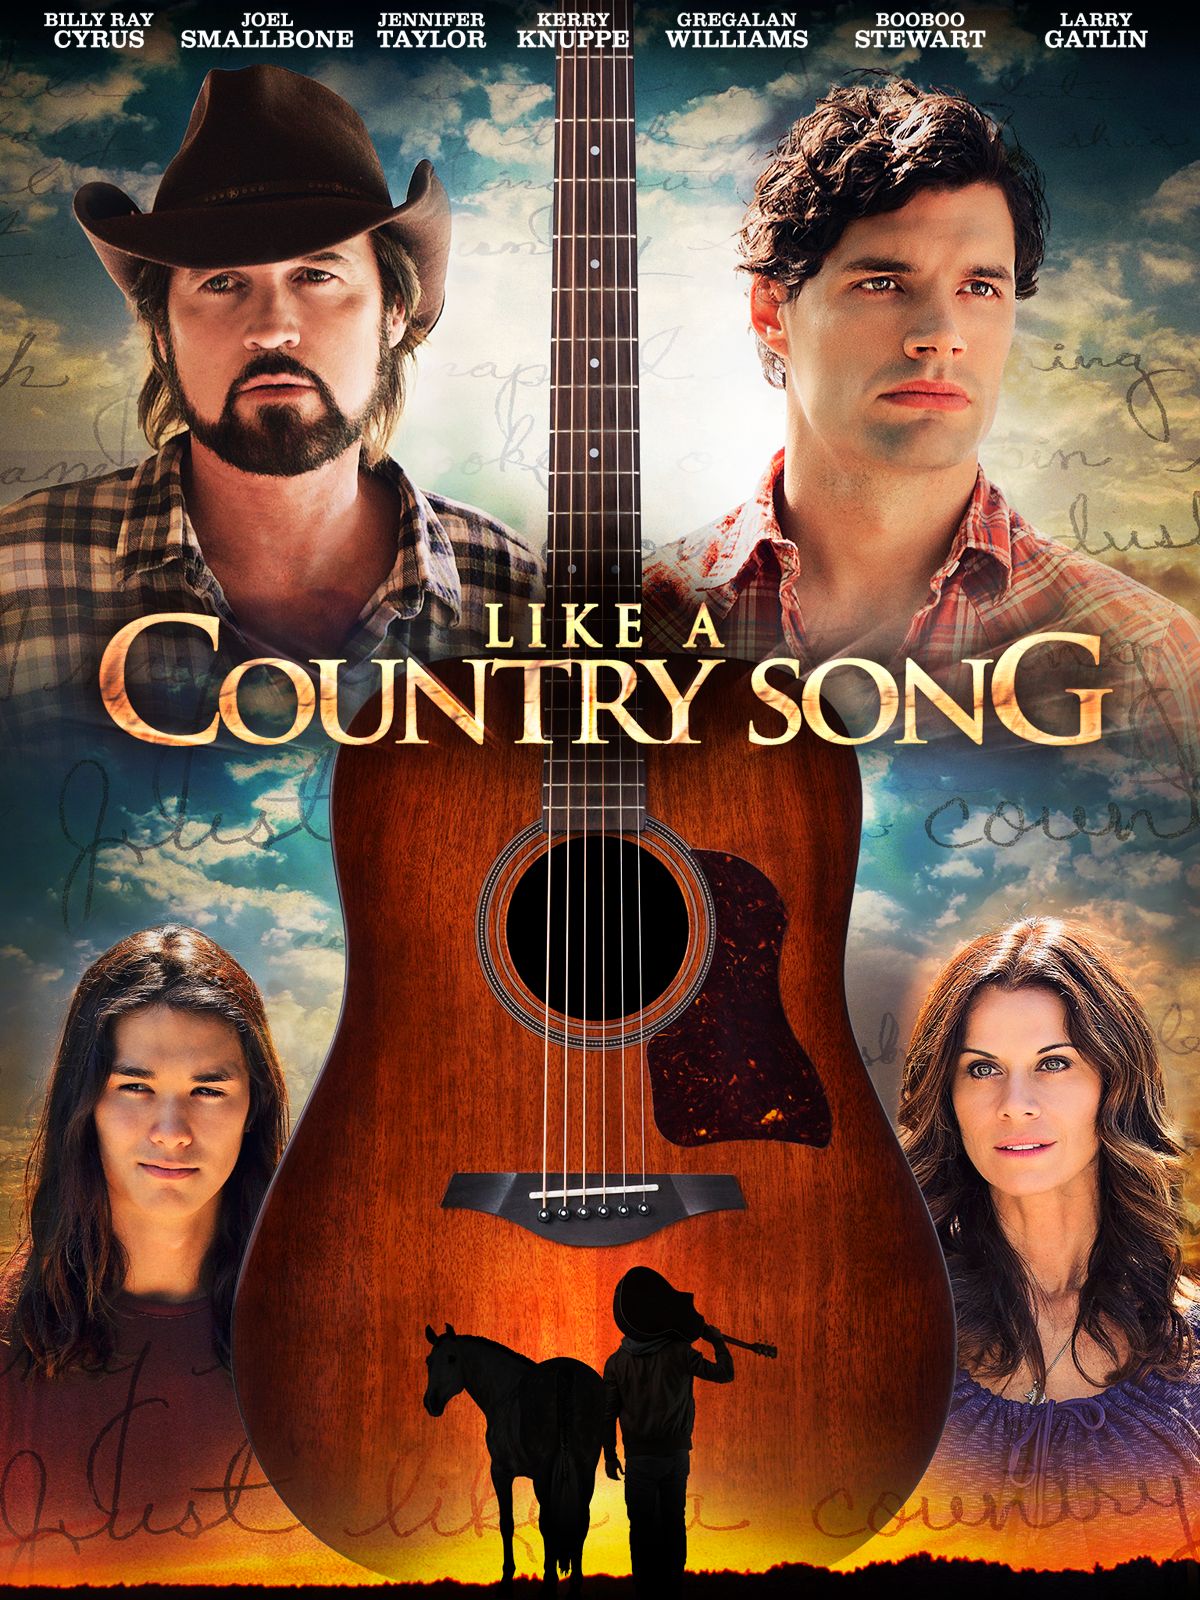 Keyart for the movie Like a Country Song